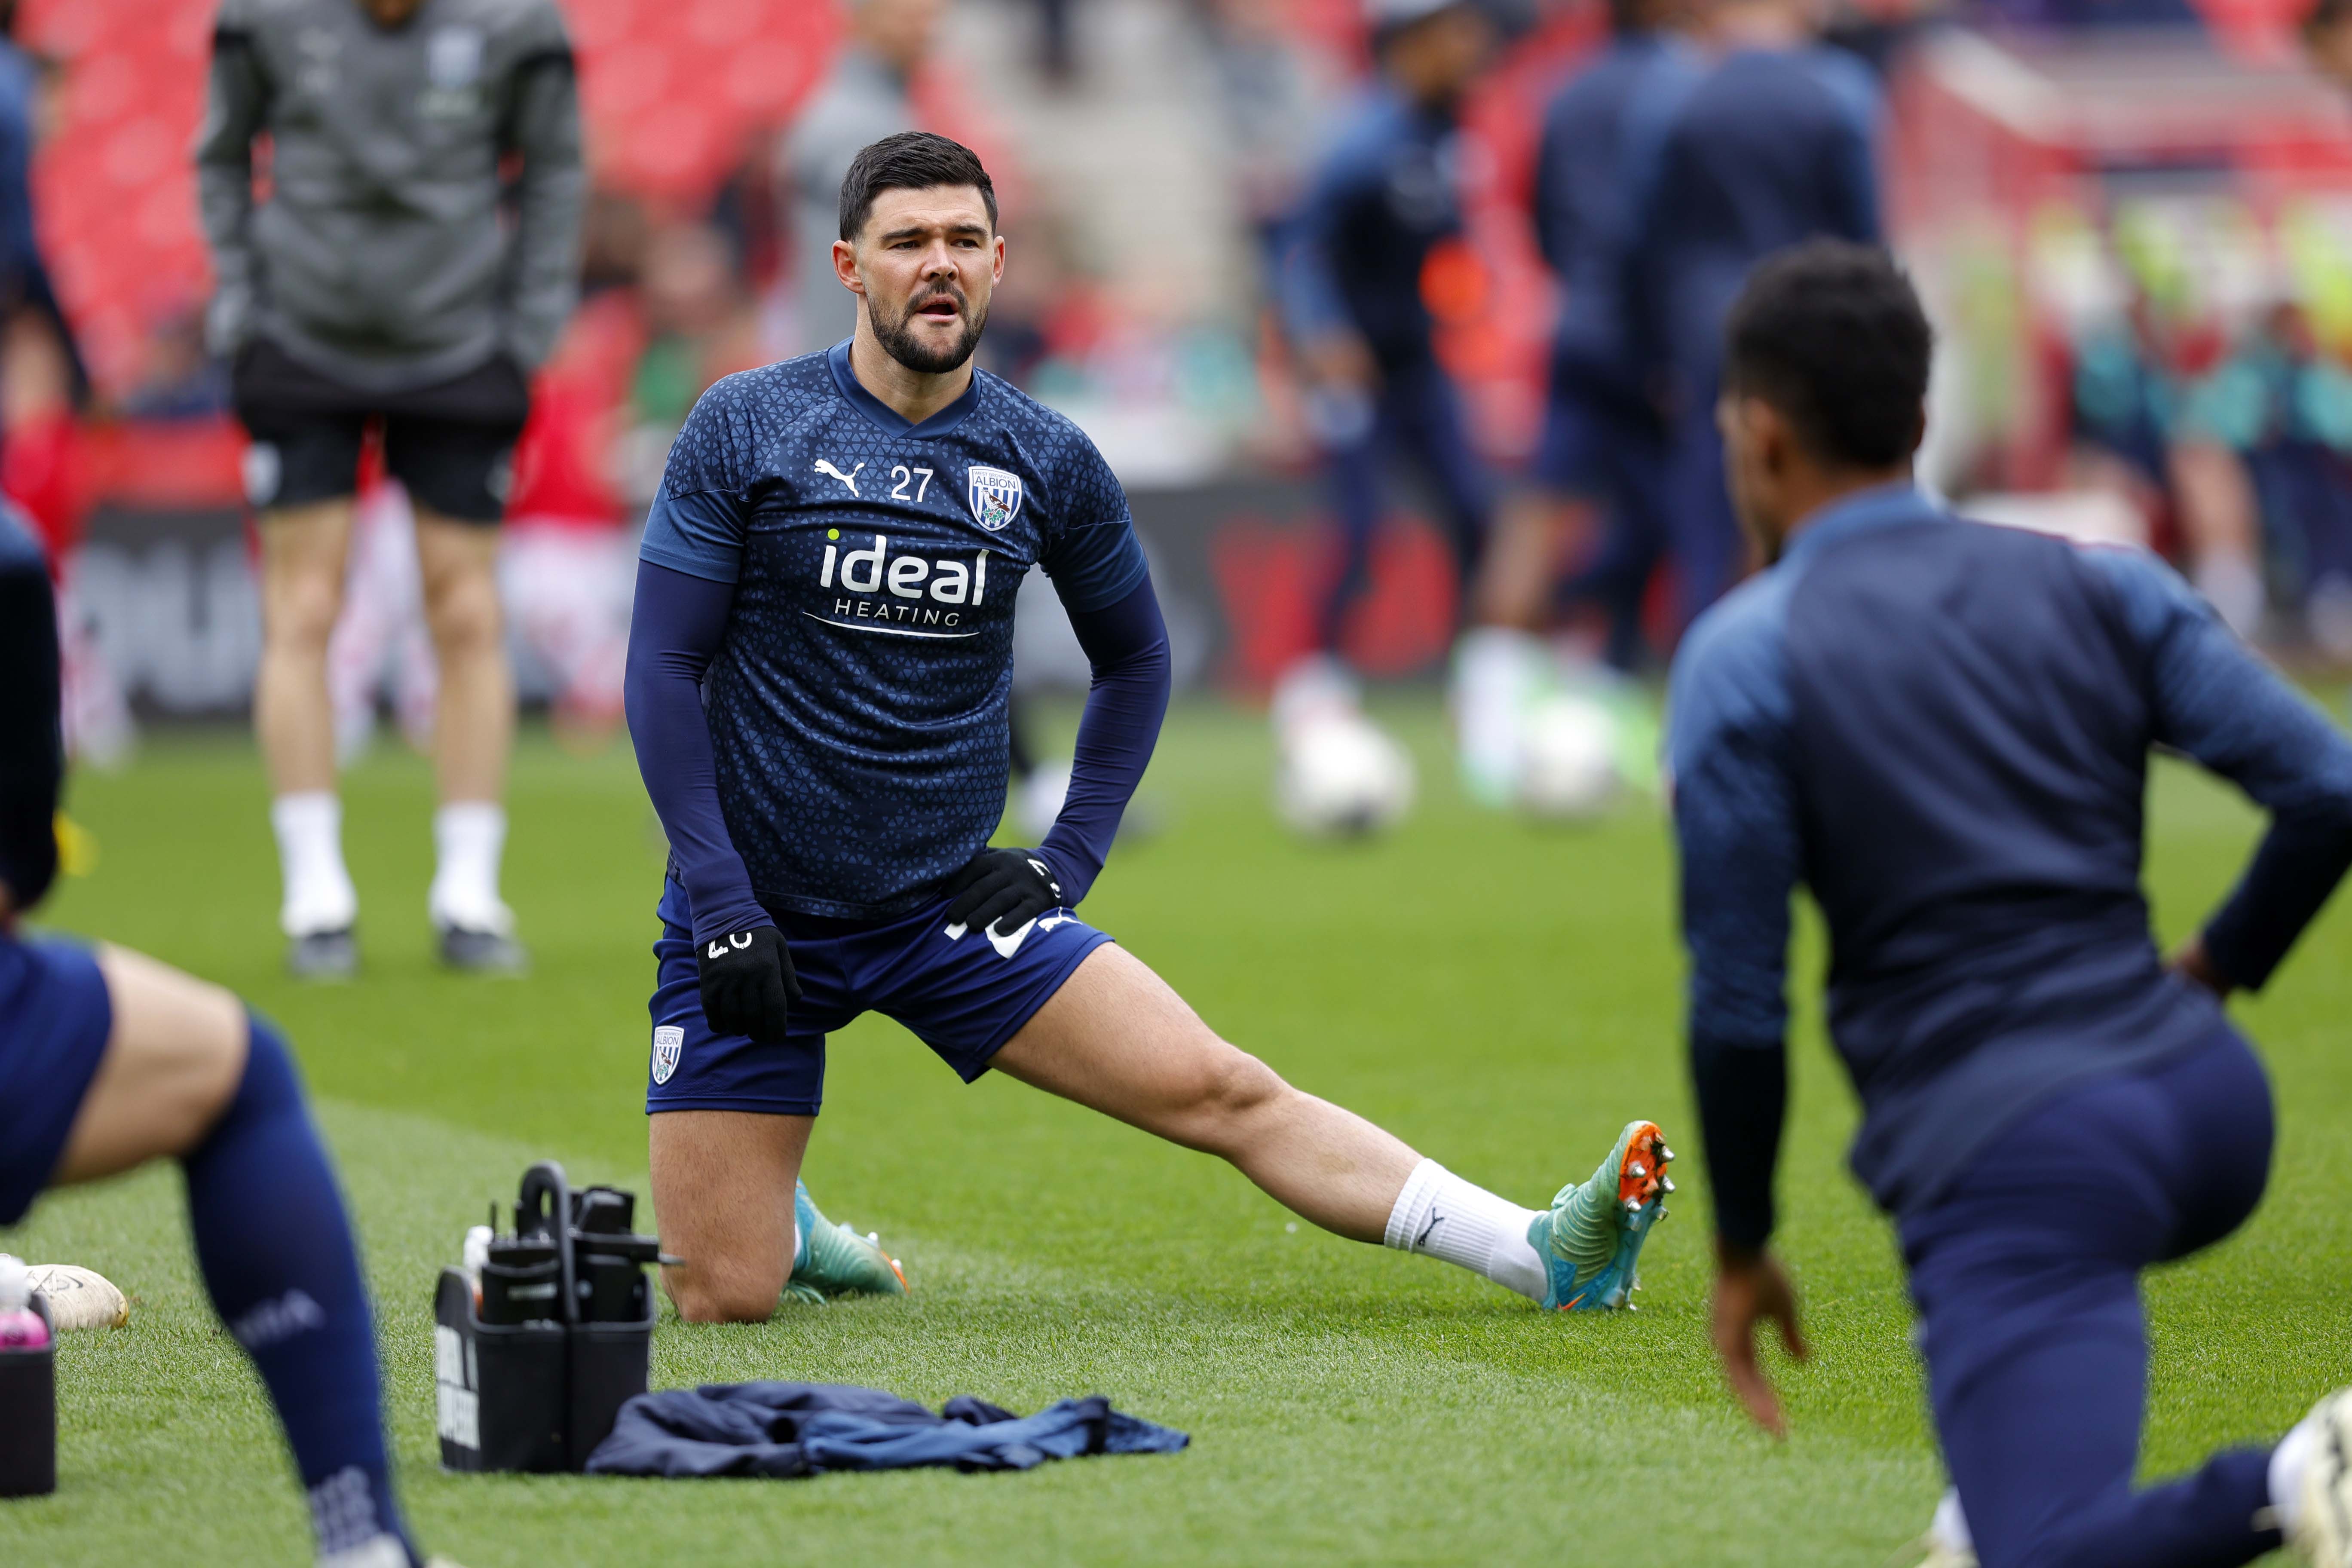 Alex Mowatt stretching during a warm up before a game